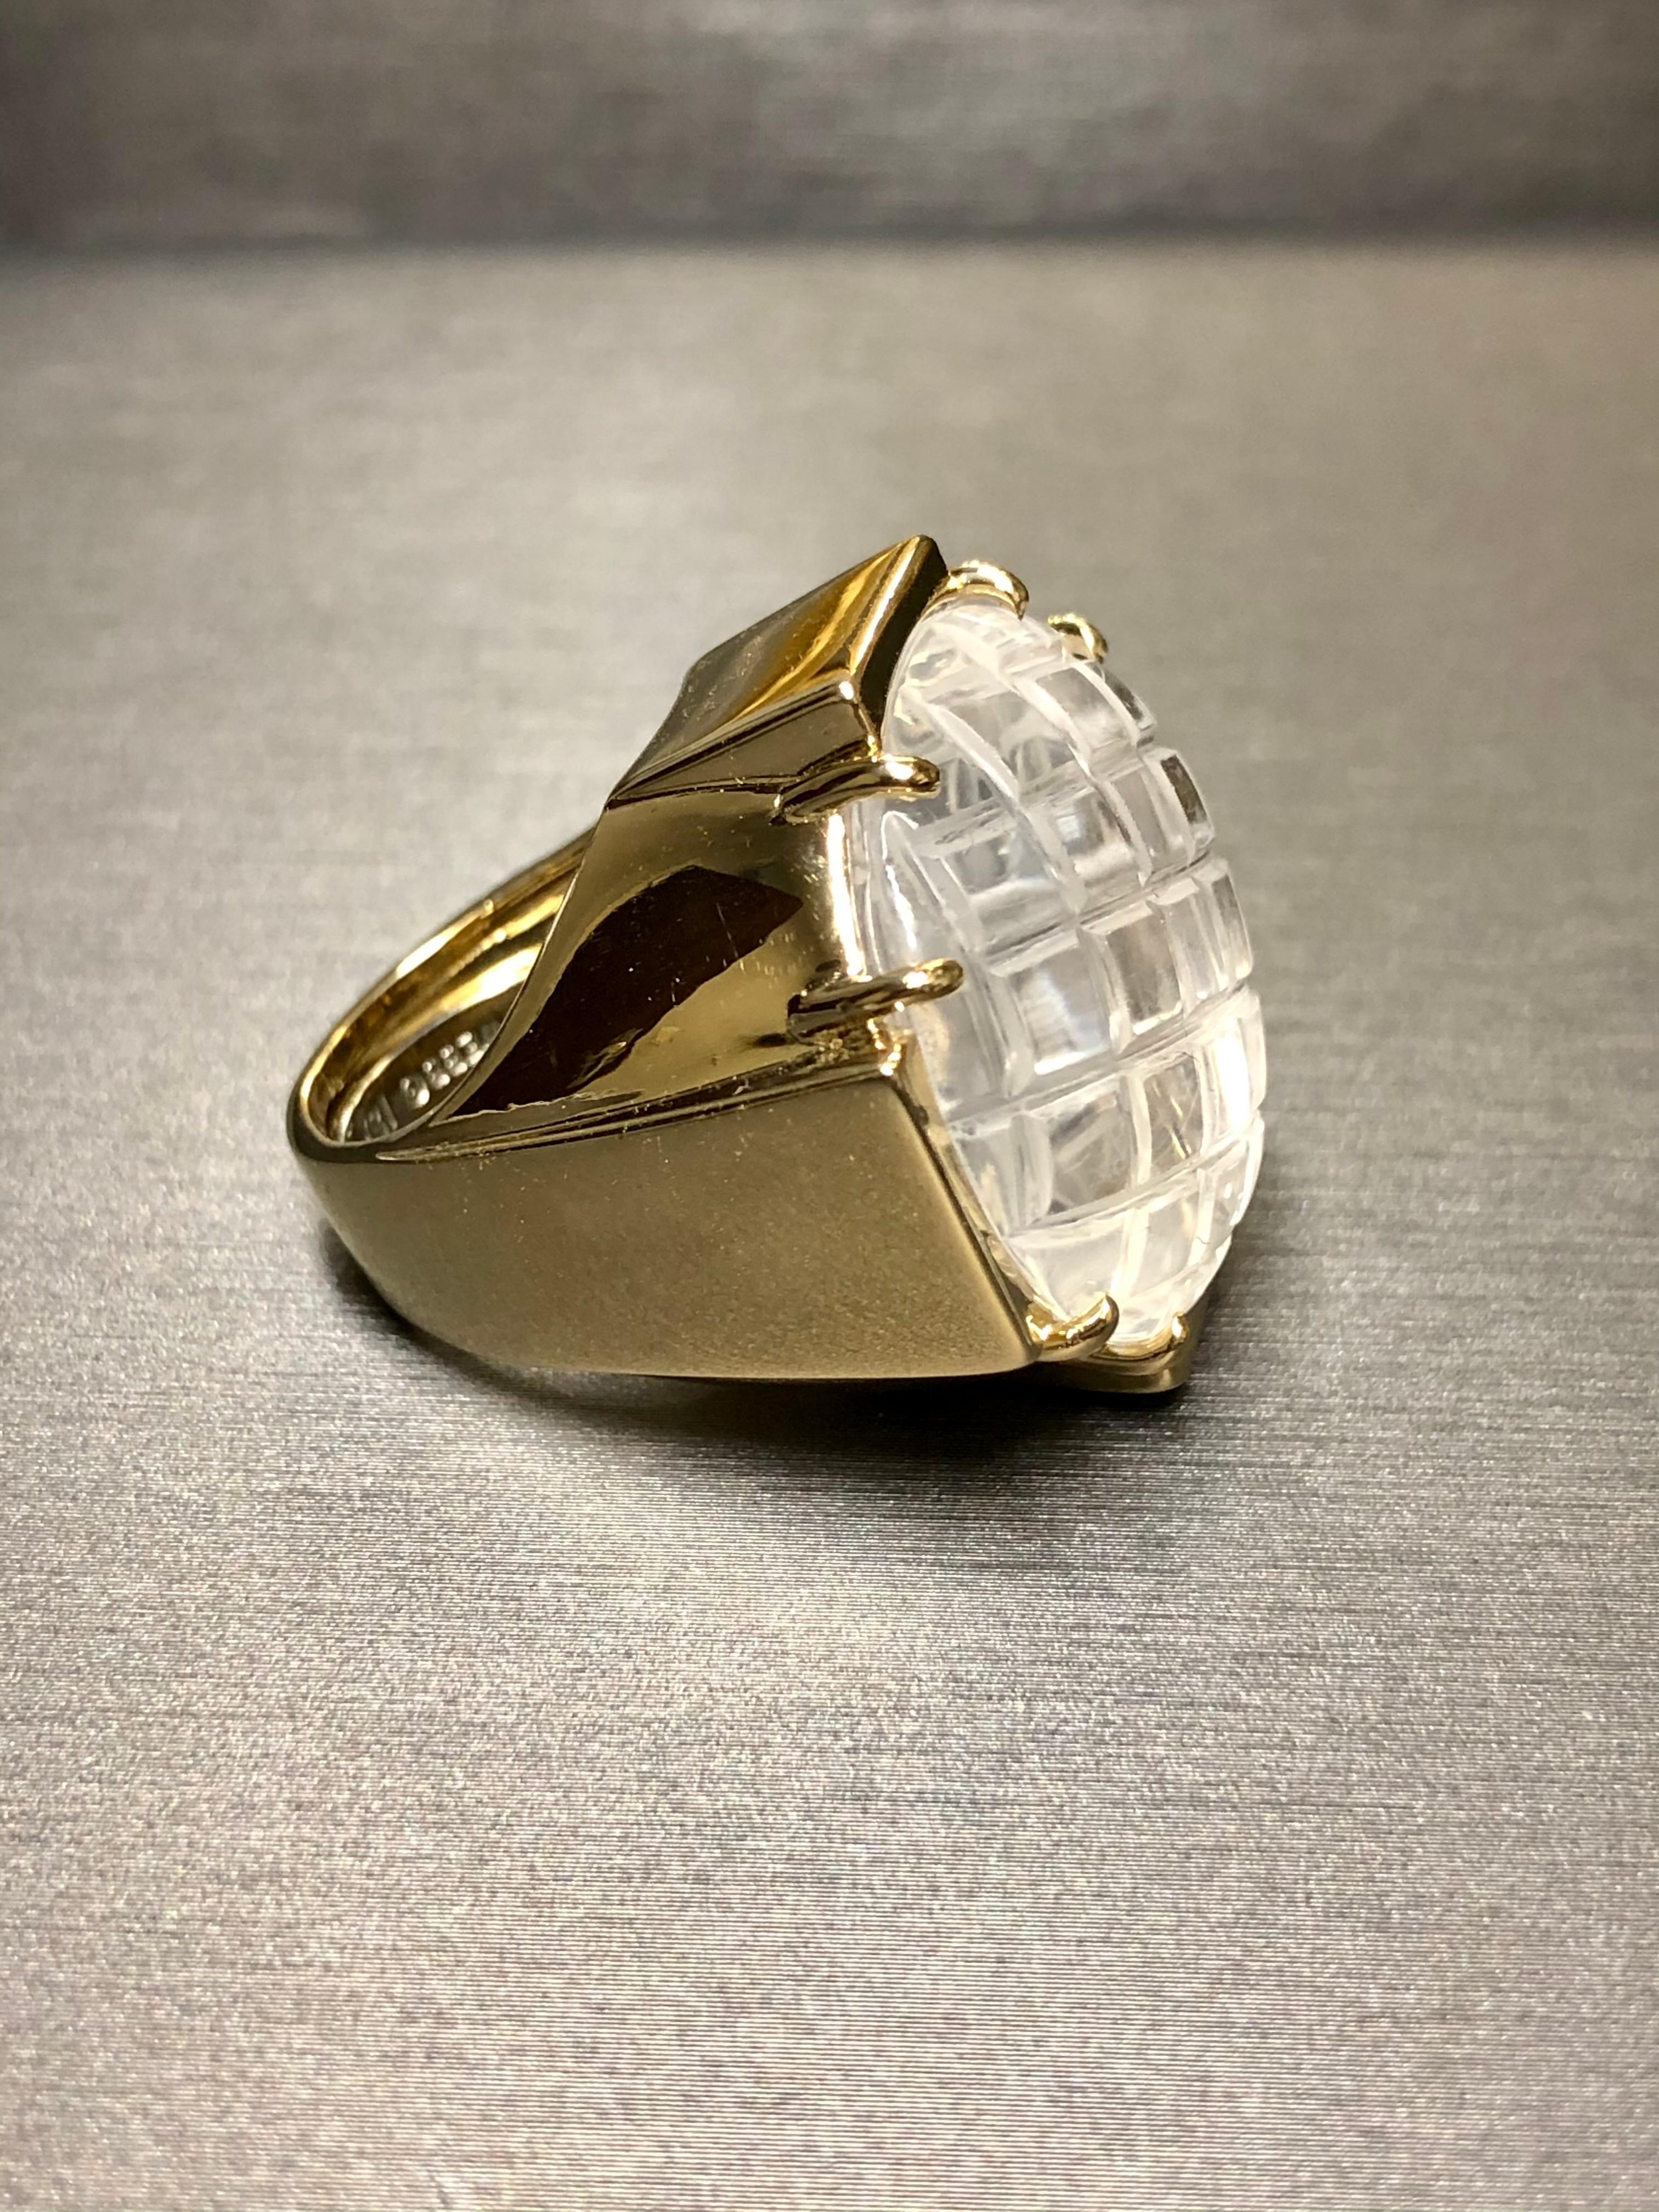 An original and one of a kind vintage ring done by David Webb. Crafted in 18K, this ring is centered by a beautifully carved dome of rock crystal quartz set a a stylishly designed heavy mounting. Freshly polished and ready to wear. One is available